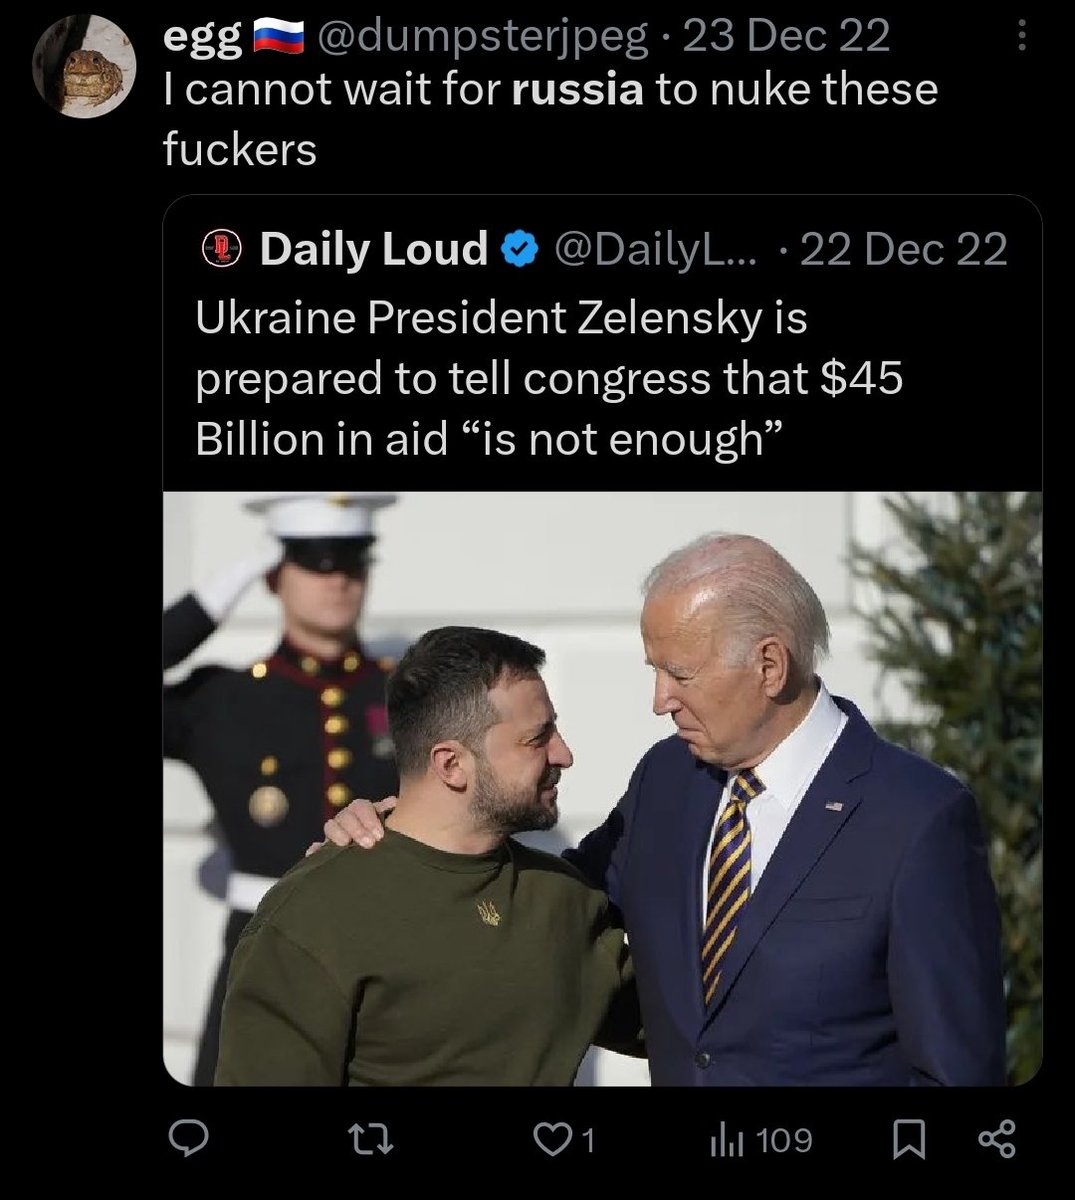 reminder that this dipshit supports russia and wants Ukrainians dead